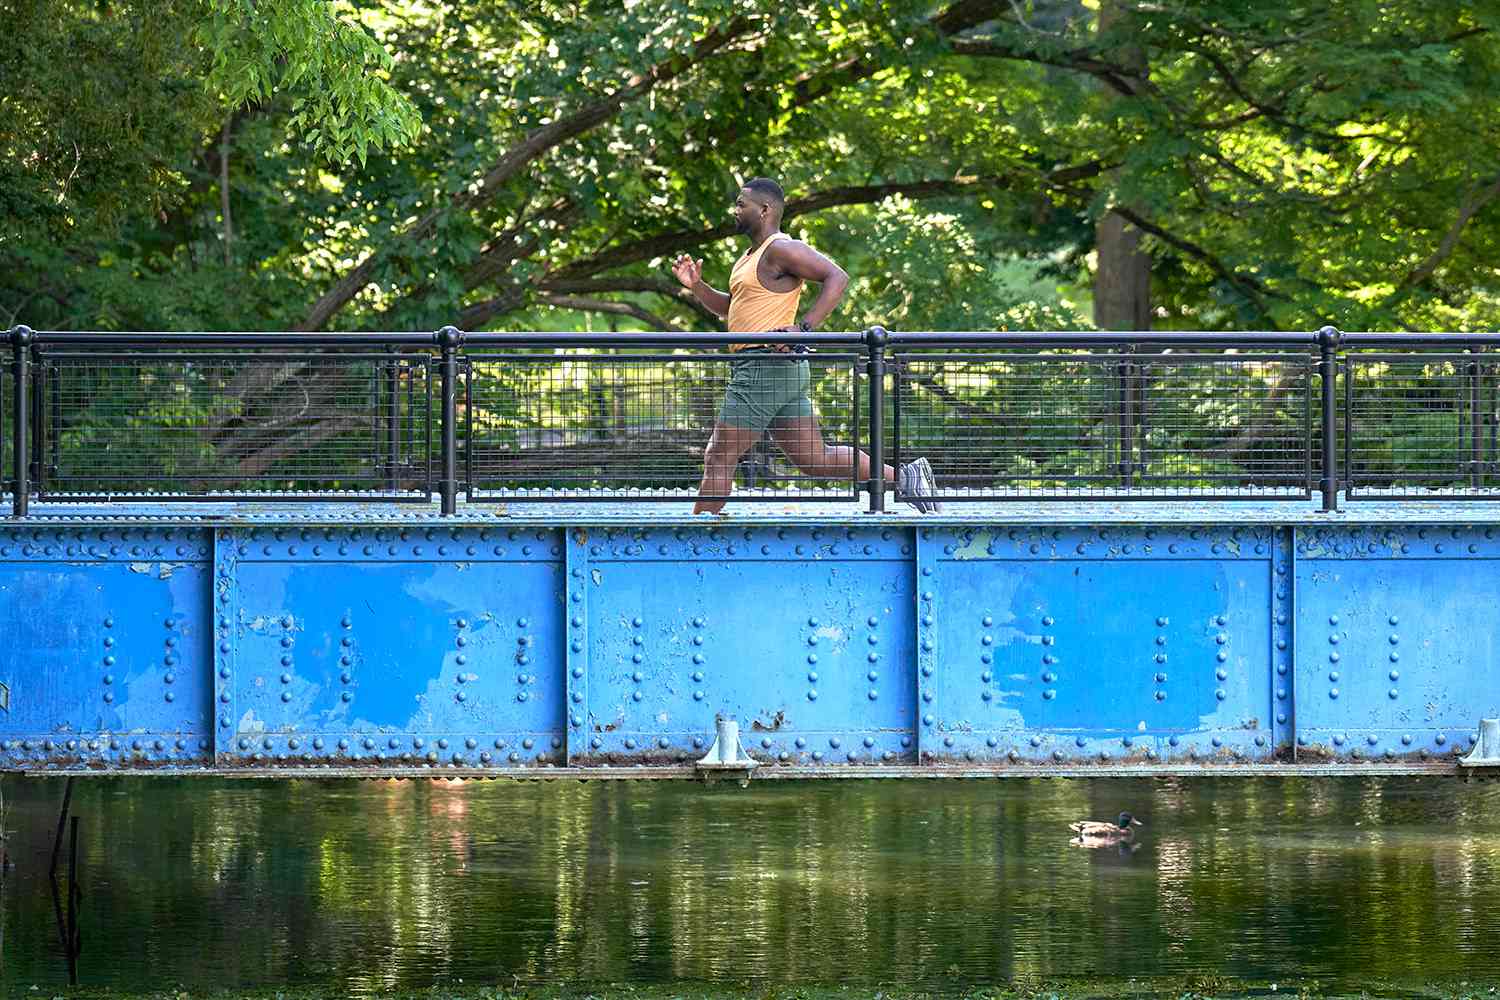 man running across a blue bridge with park in background